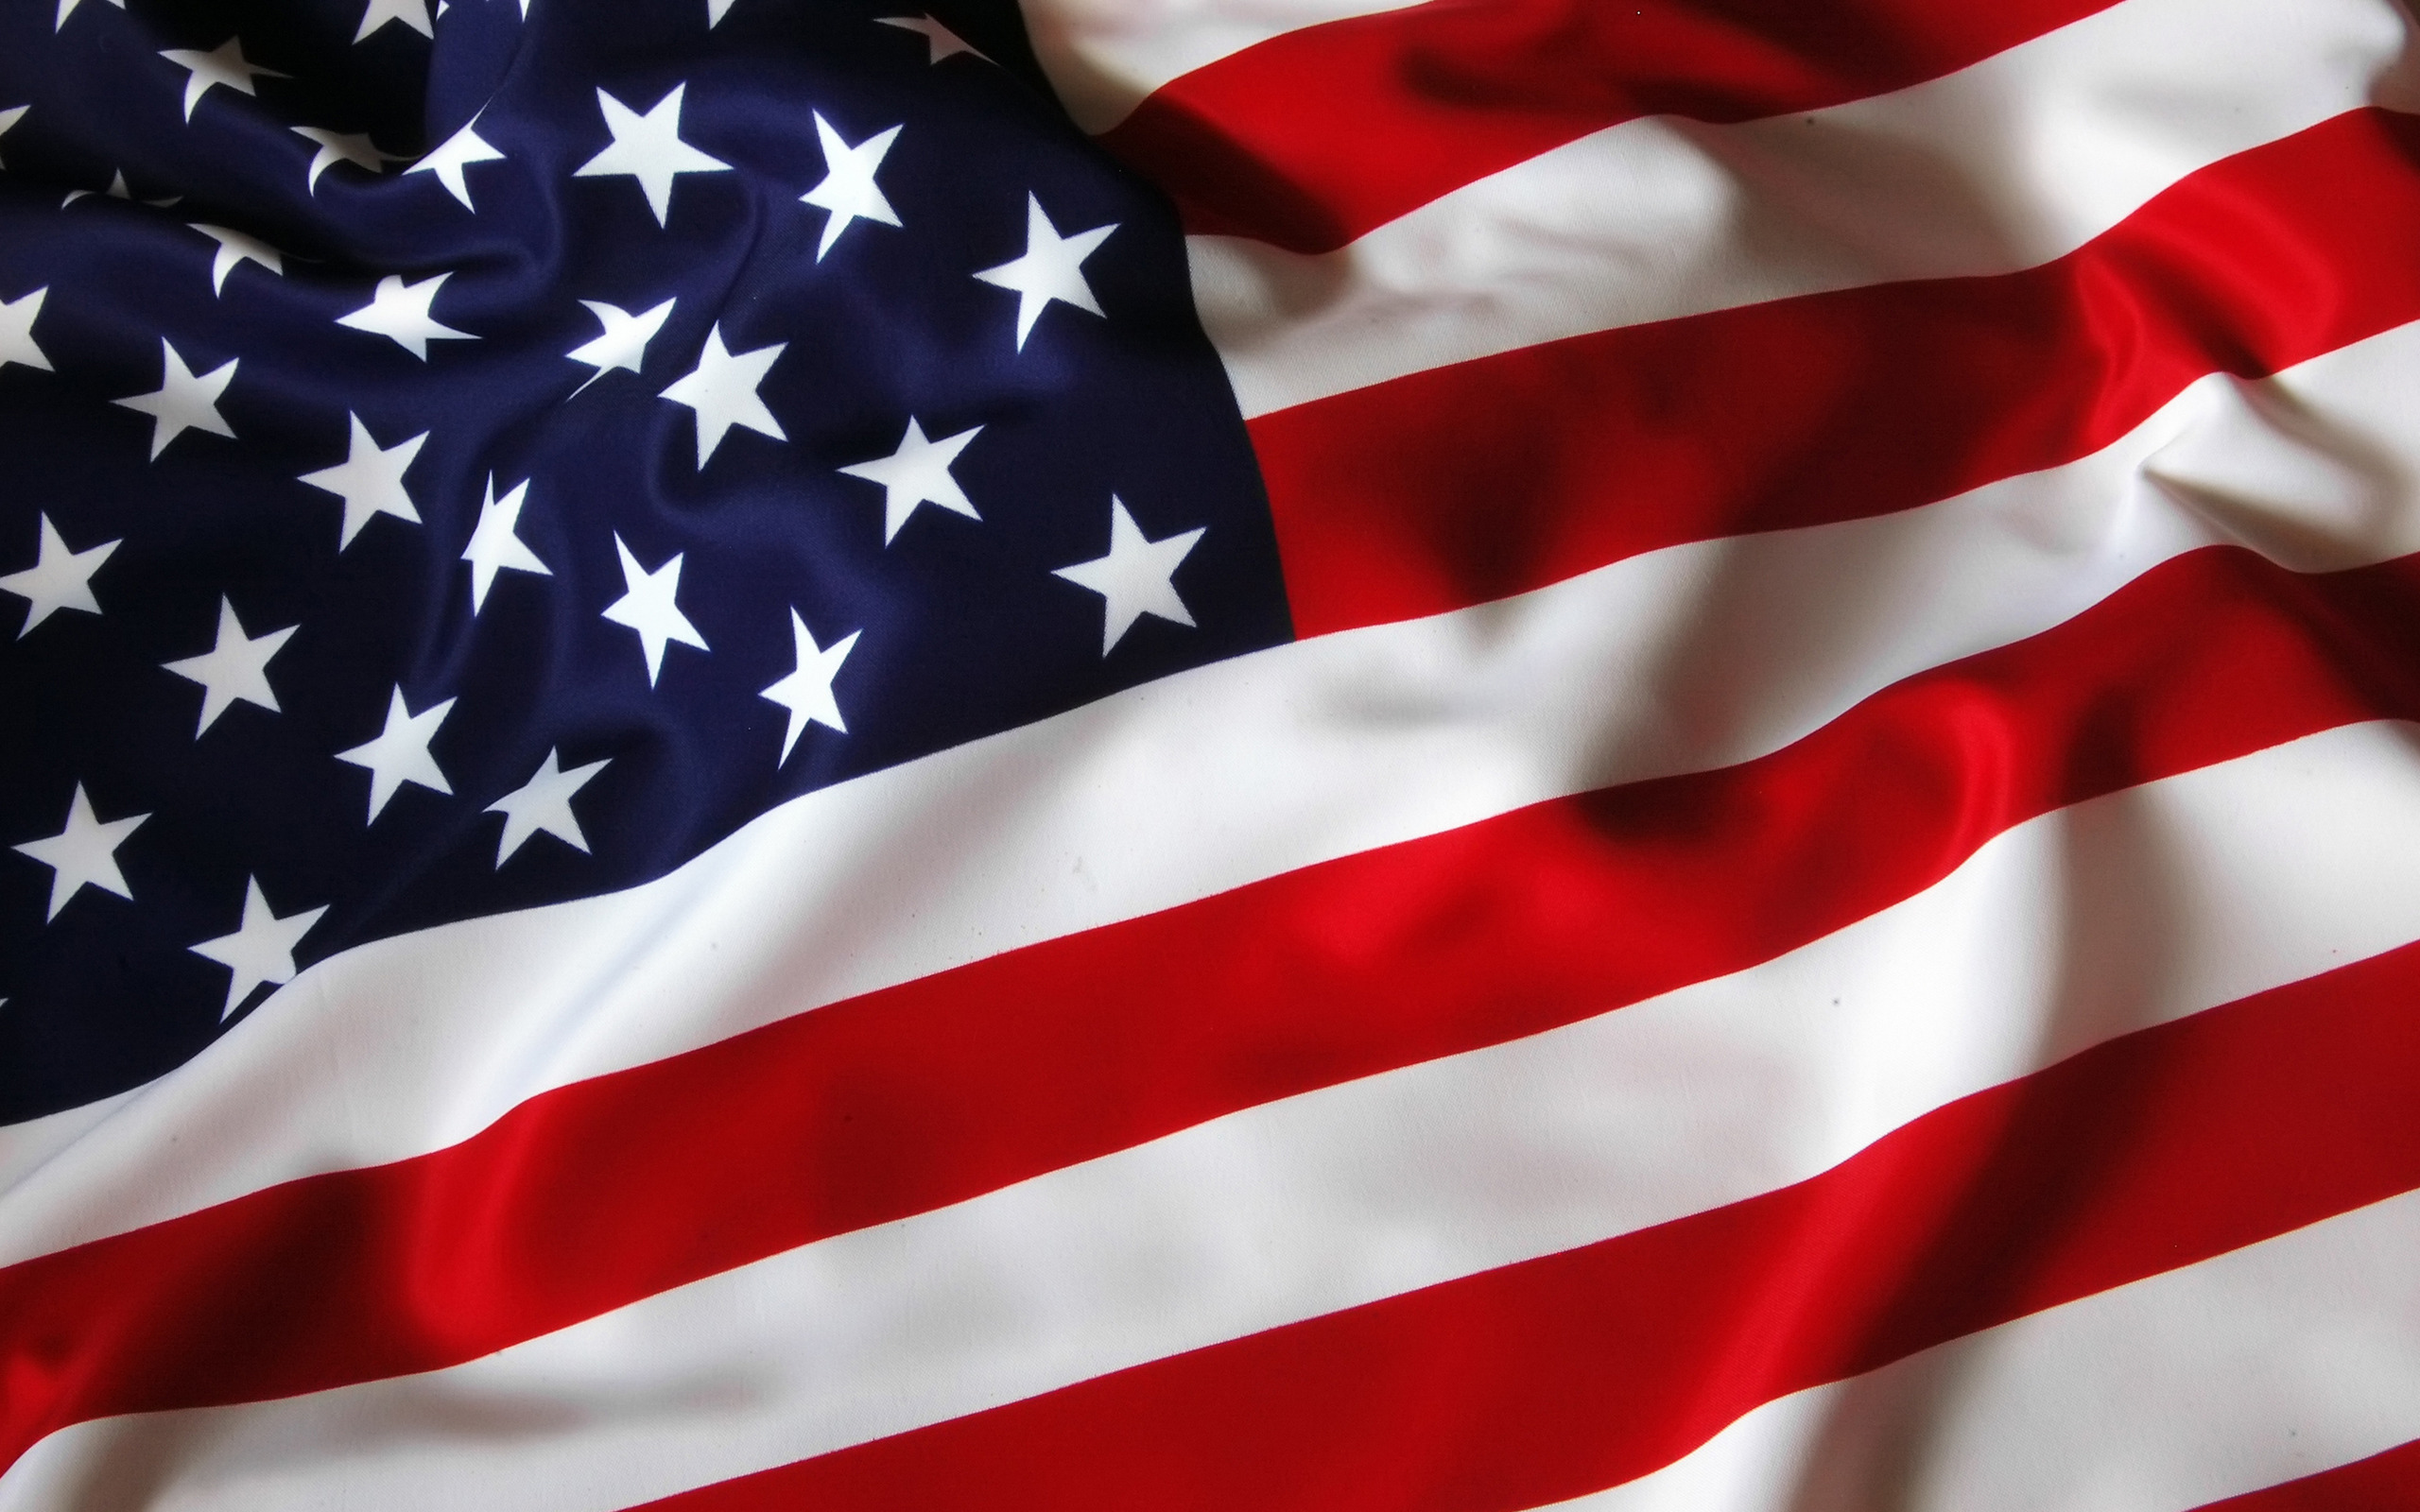 United States Flag Full HD Wallpapers Download Desktop 2560x1600